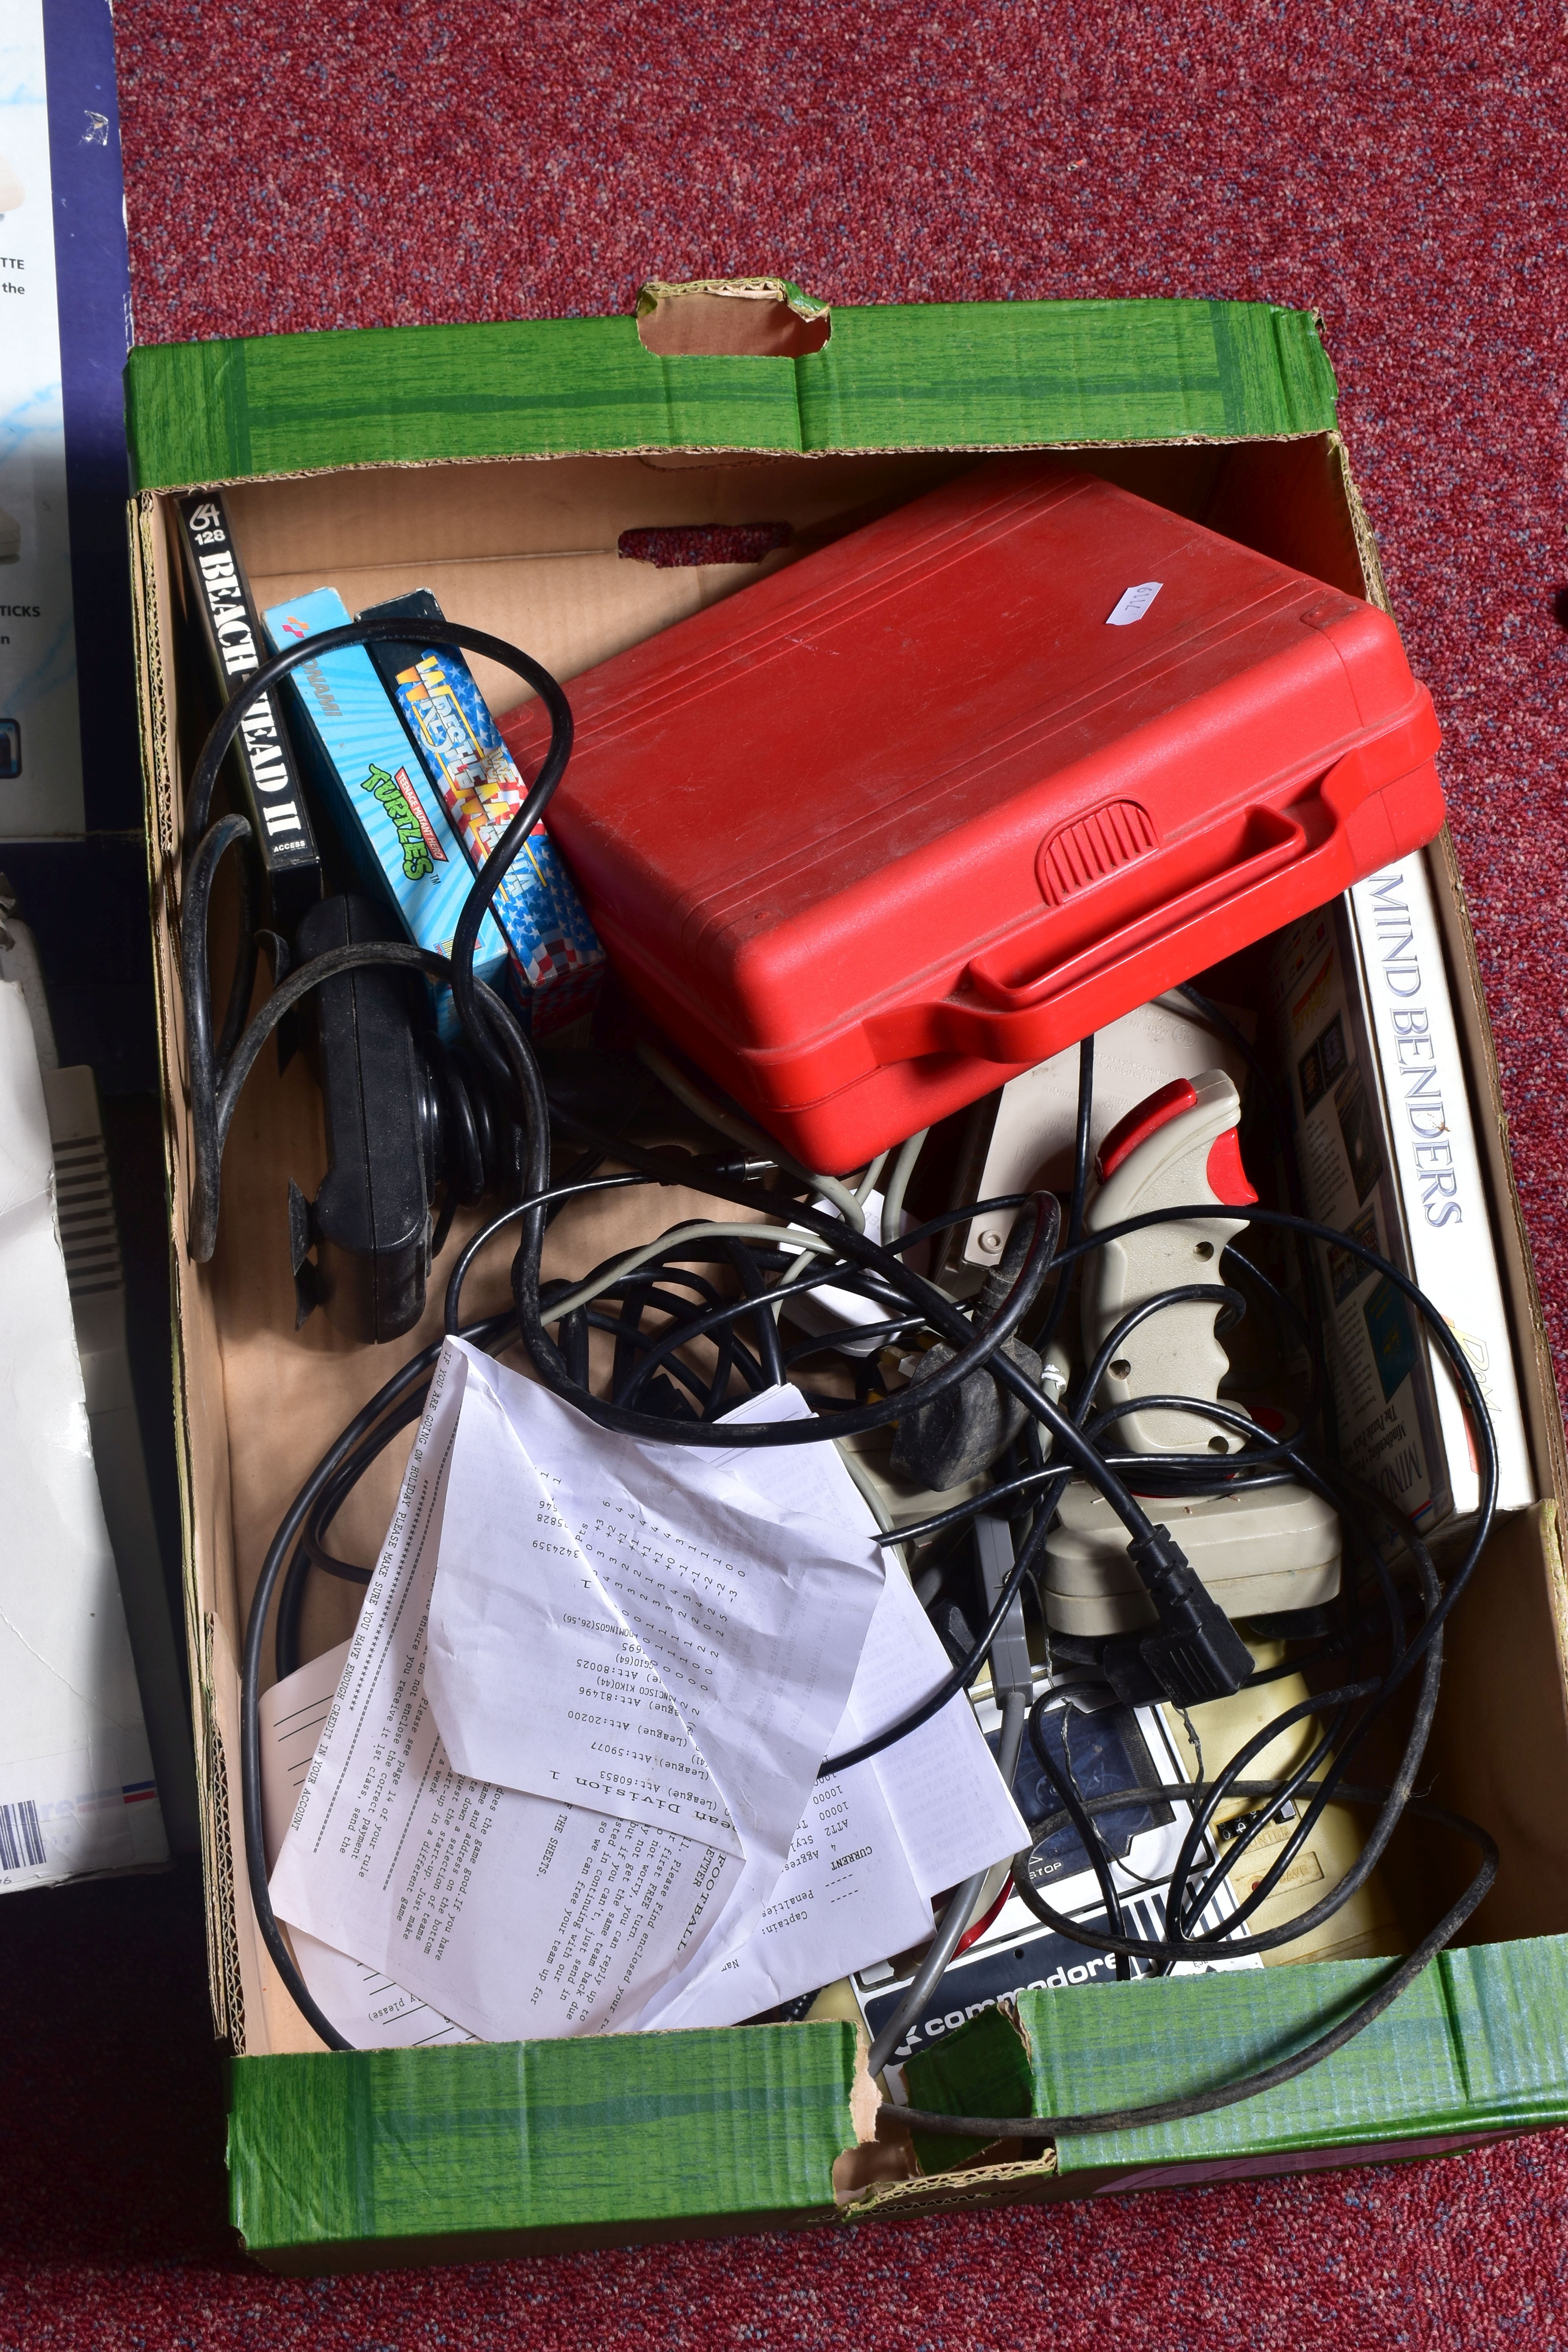 A BOXED COMMODORE 64 (C64 MODEL), ACCESSORIES AND A QUANTITY OF GAMES, accessories include a - Image 2 of 6